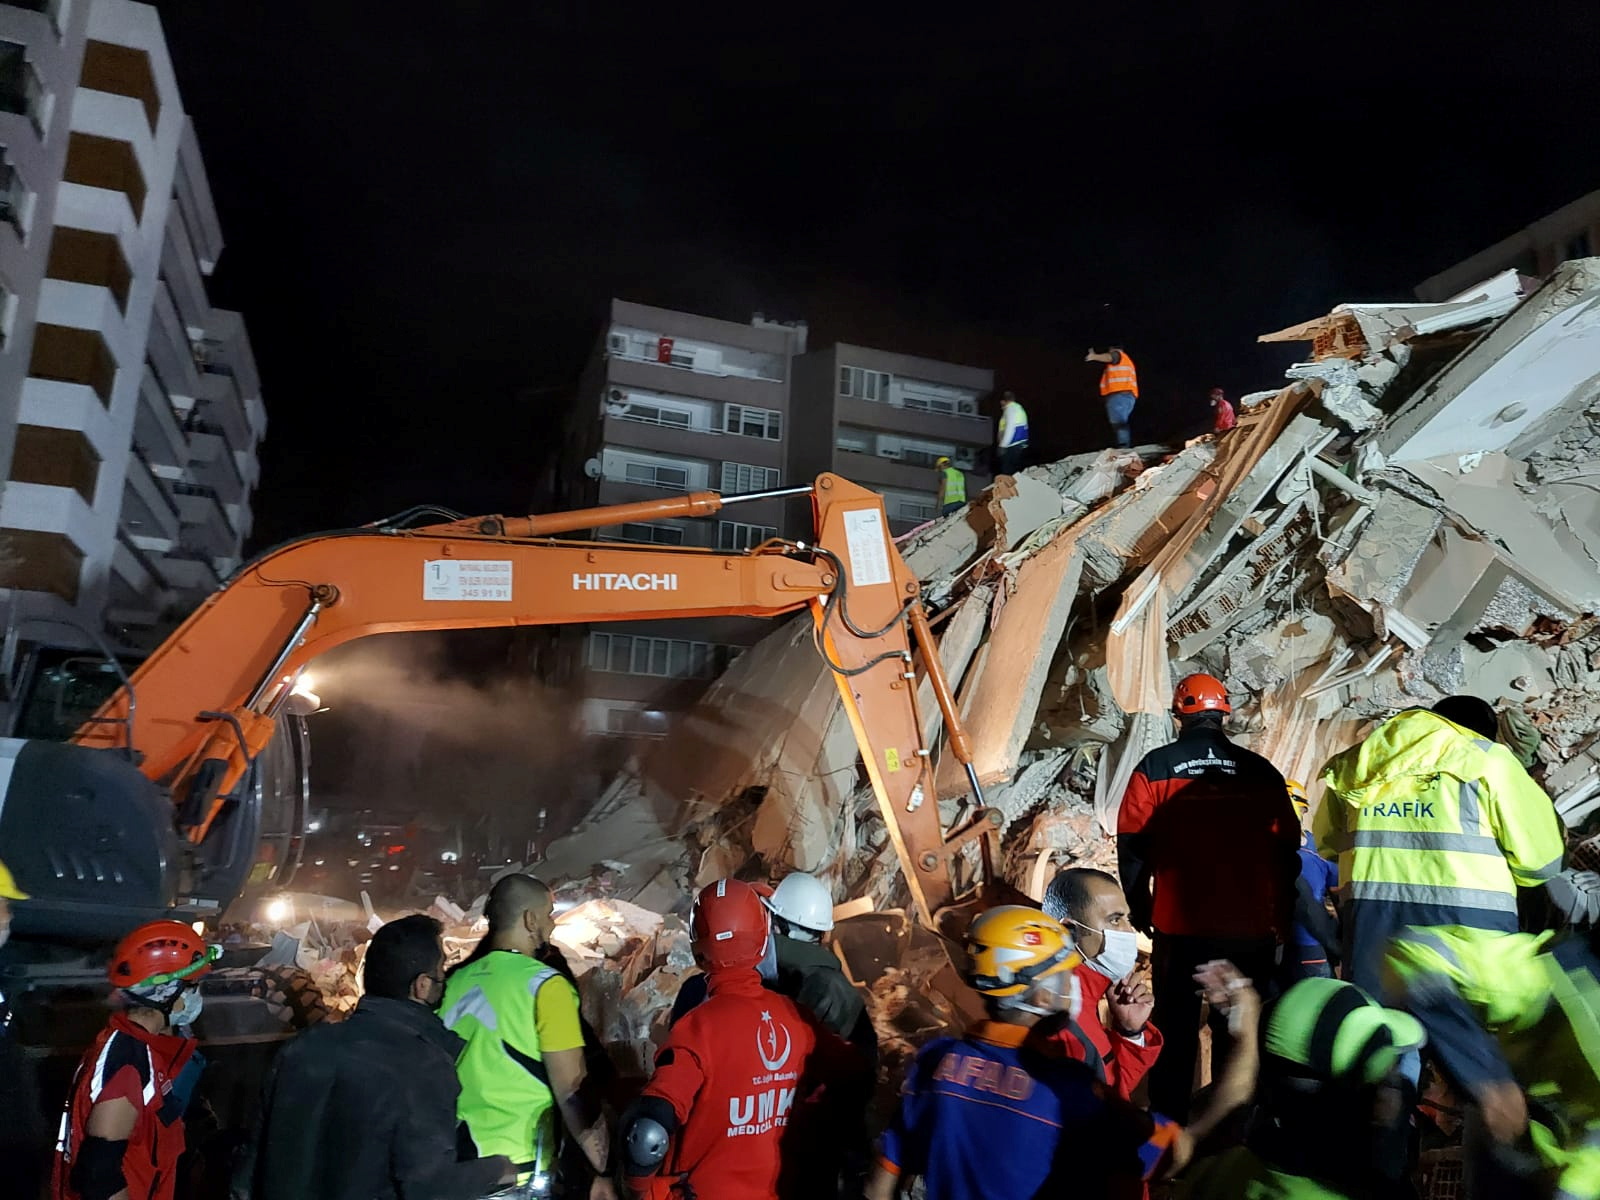 Rescque teams search for survivors at a collapsed building after a strong earthquake struck the Aegean Sea where some buildings collapsed in the coastal province of Izmir, Turkey, October 30, 2020. REUTERS/Tuncay Dersinlioglu